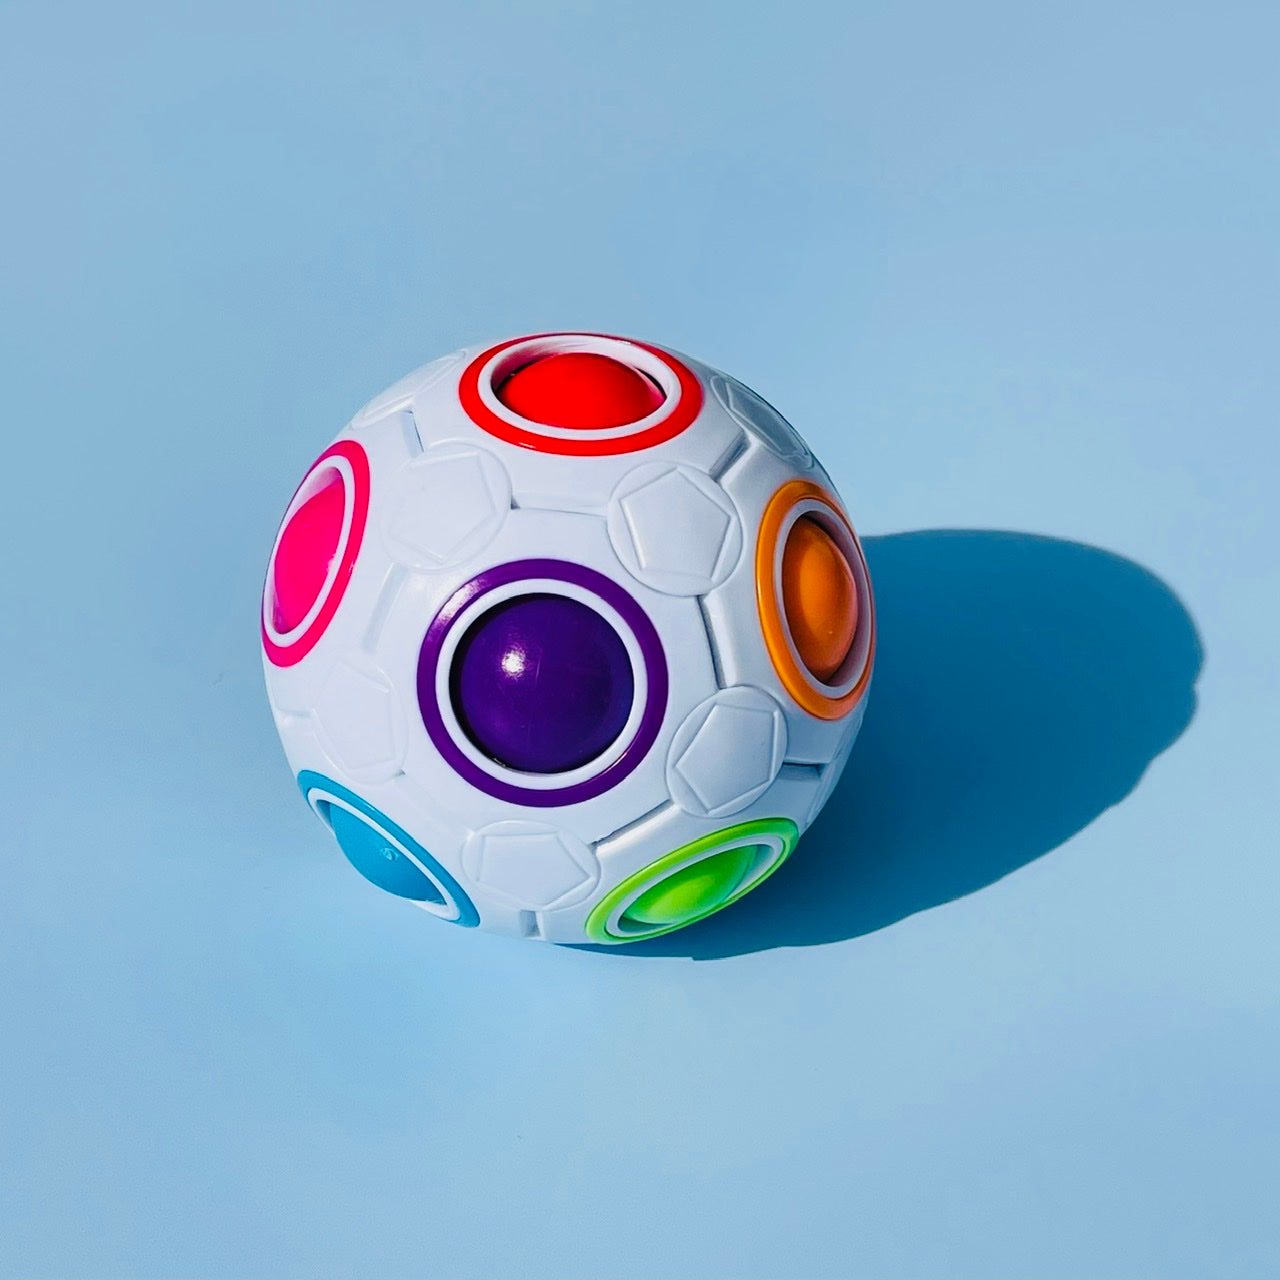 THE PUZZLE BALL